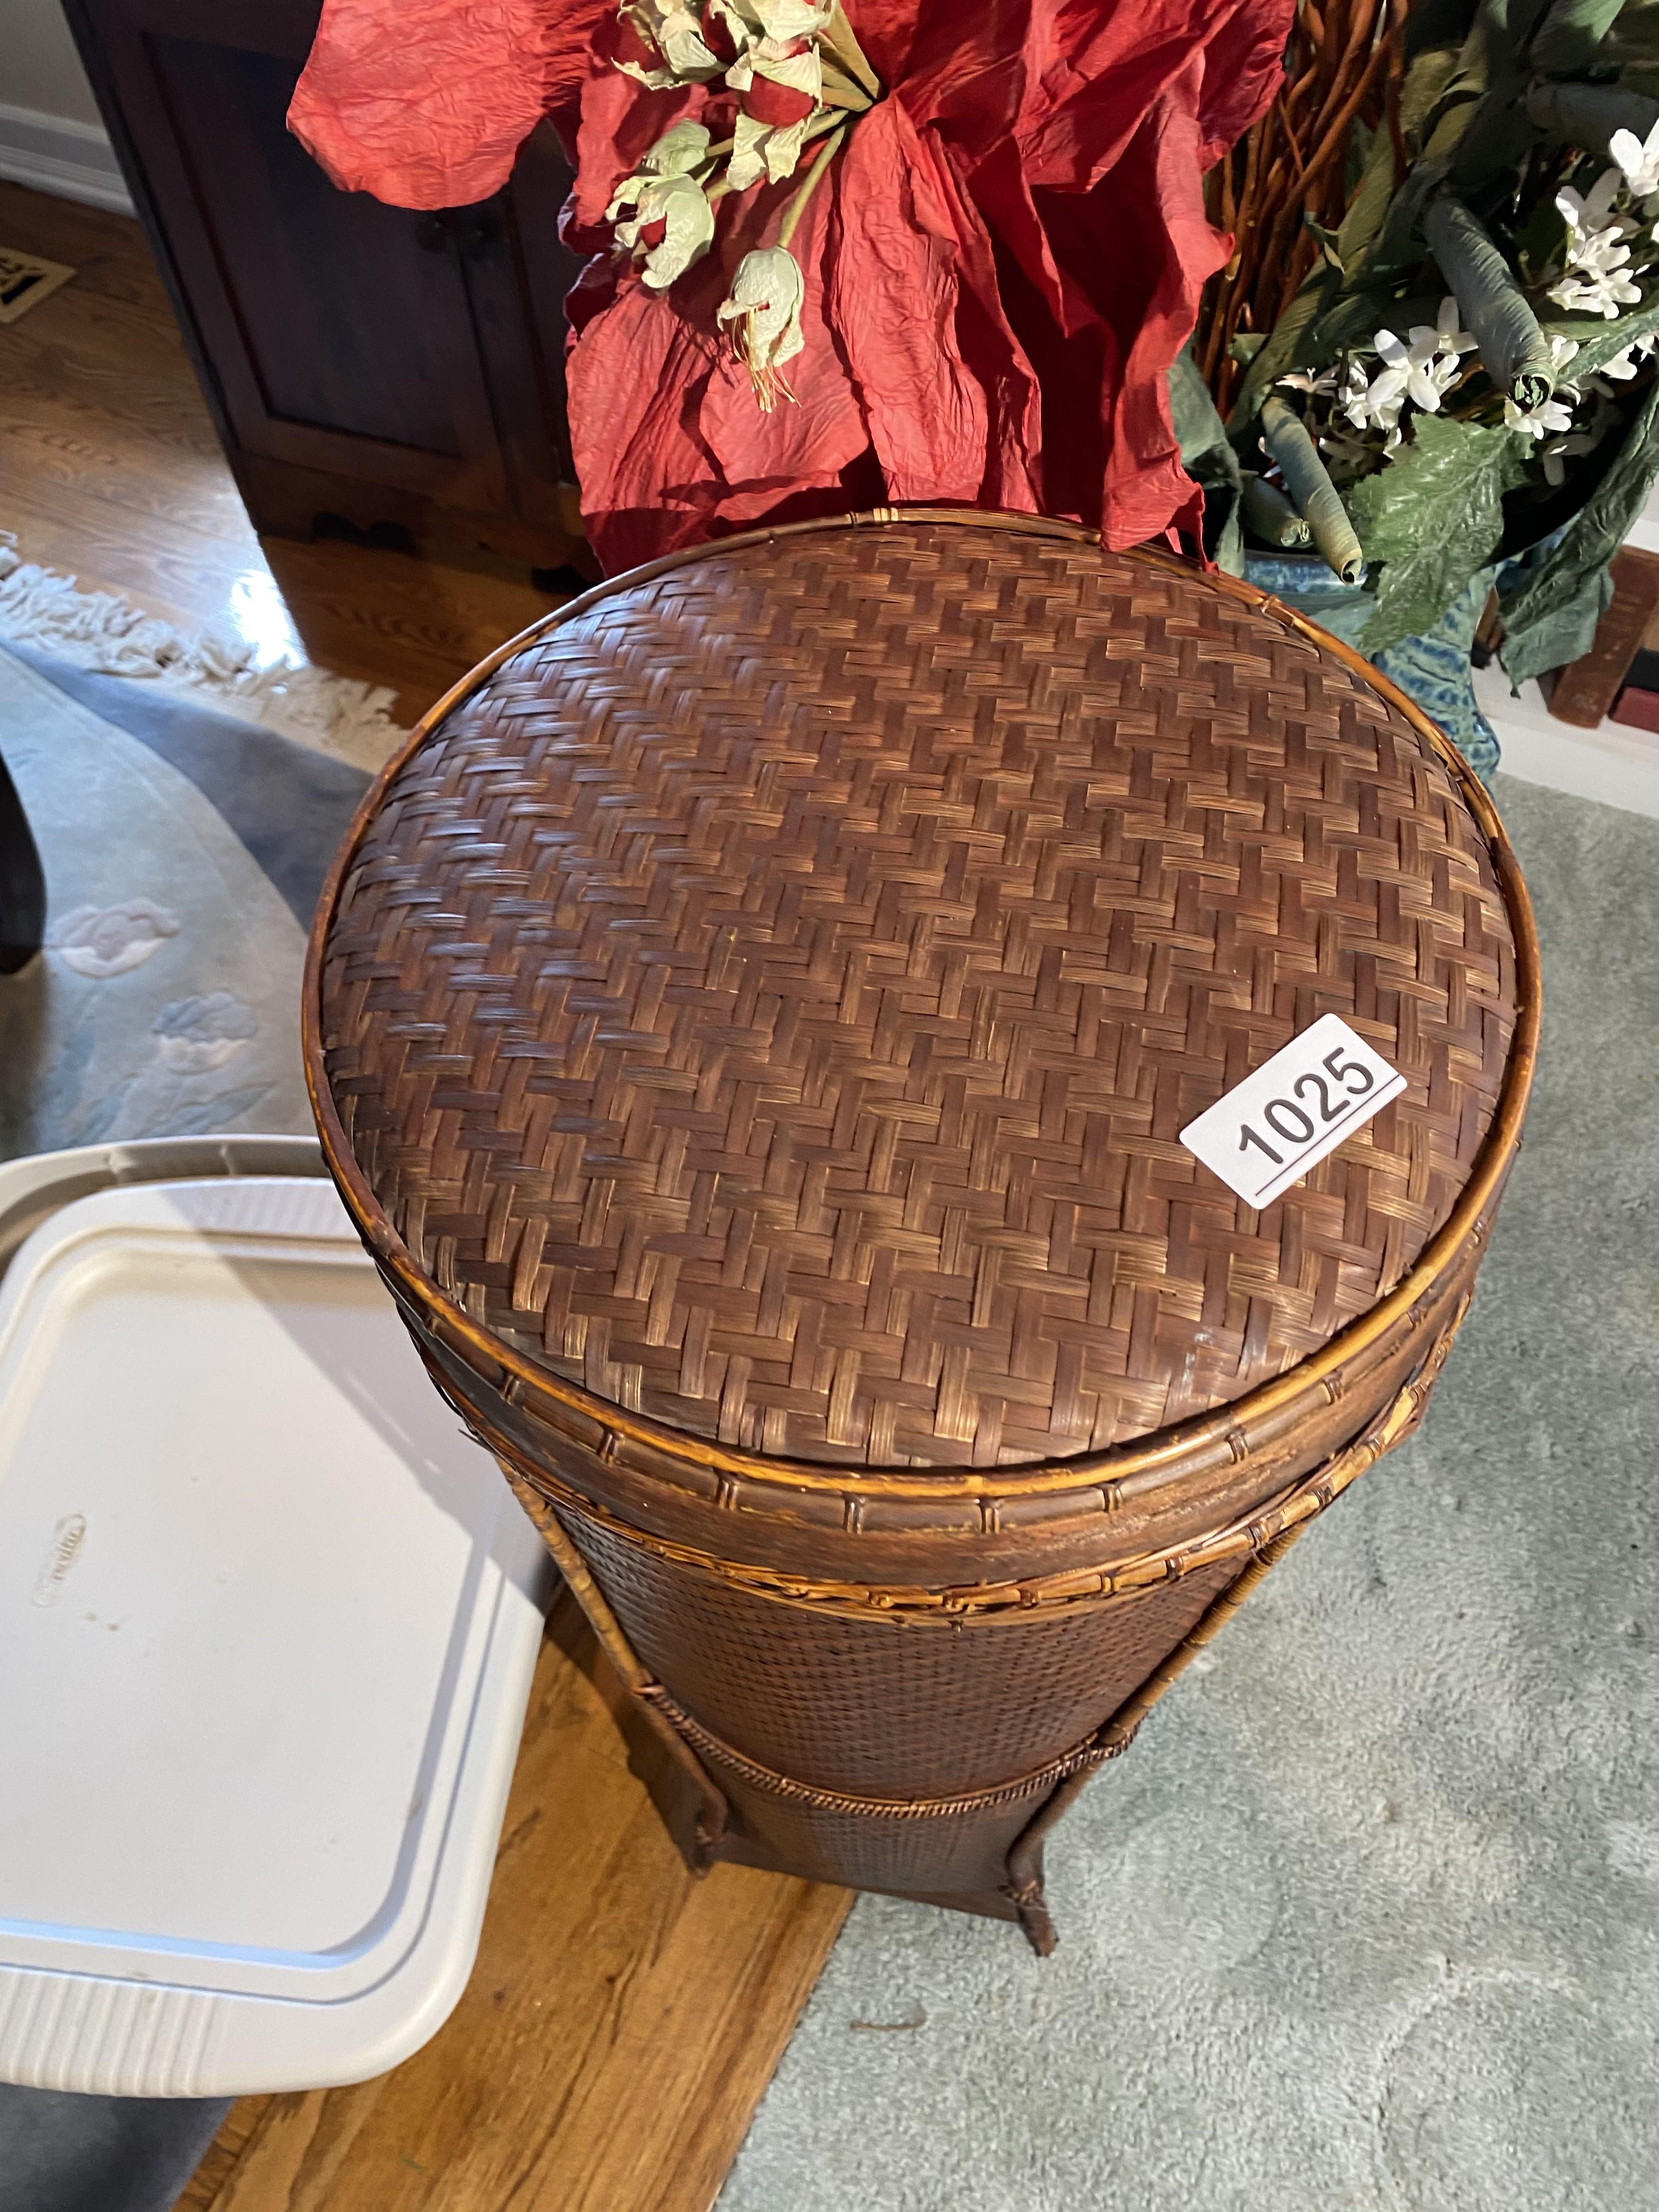 Tall Wicker Basket or Storage container